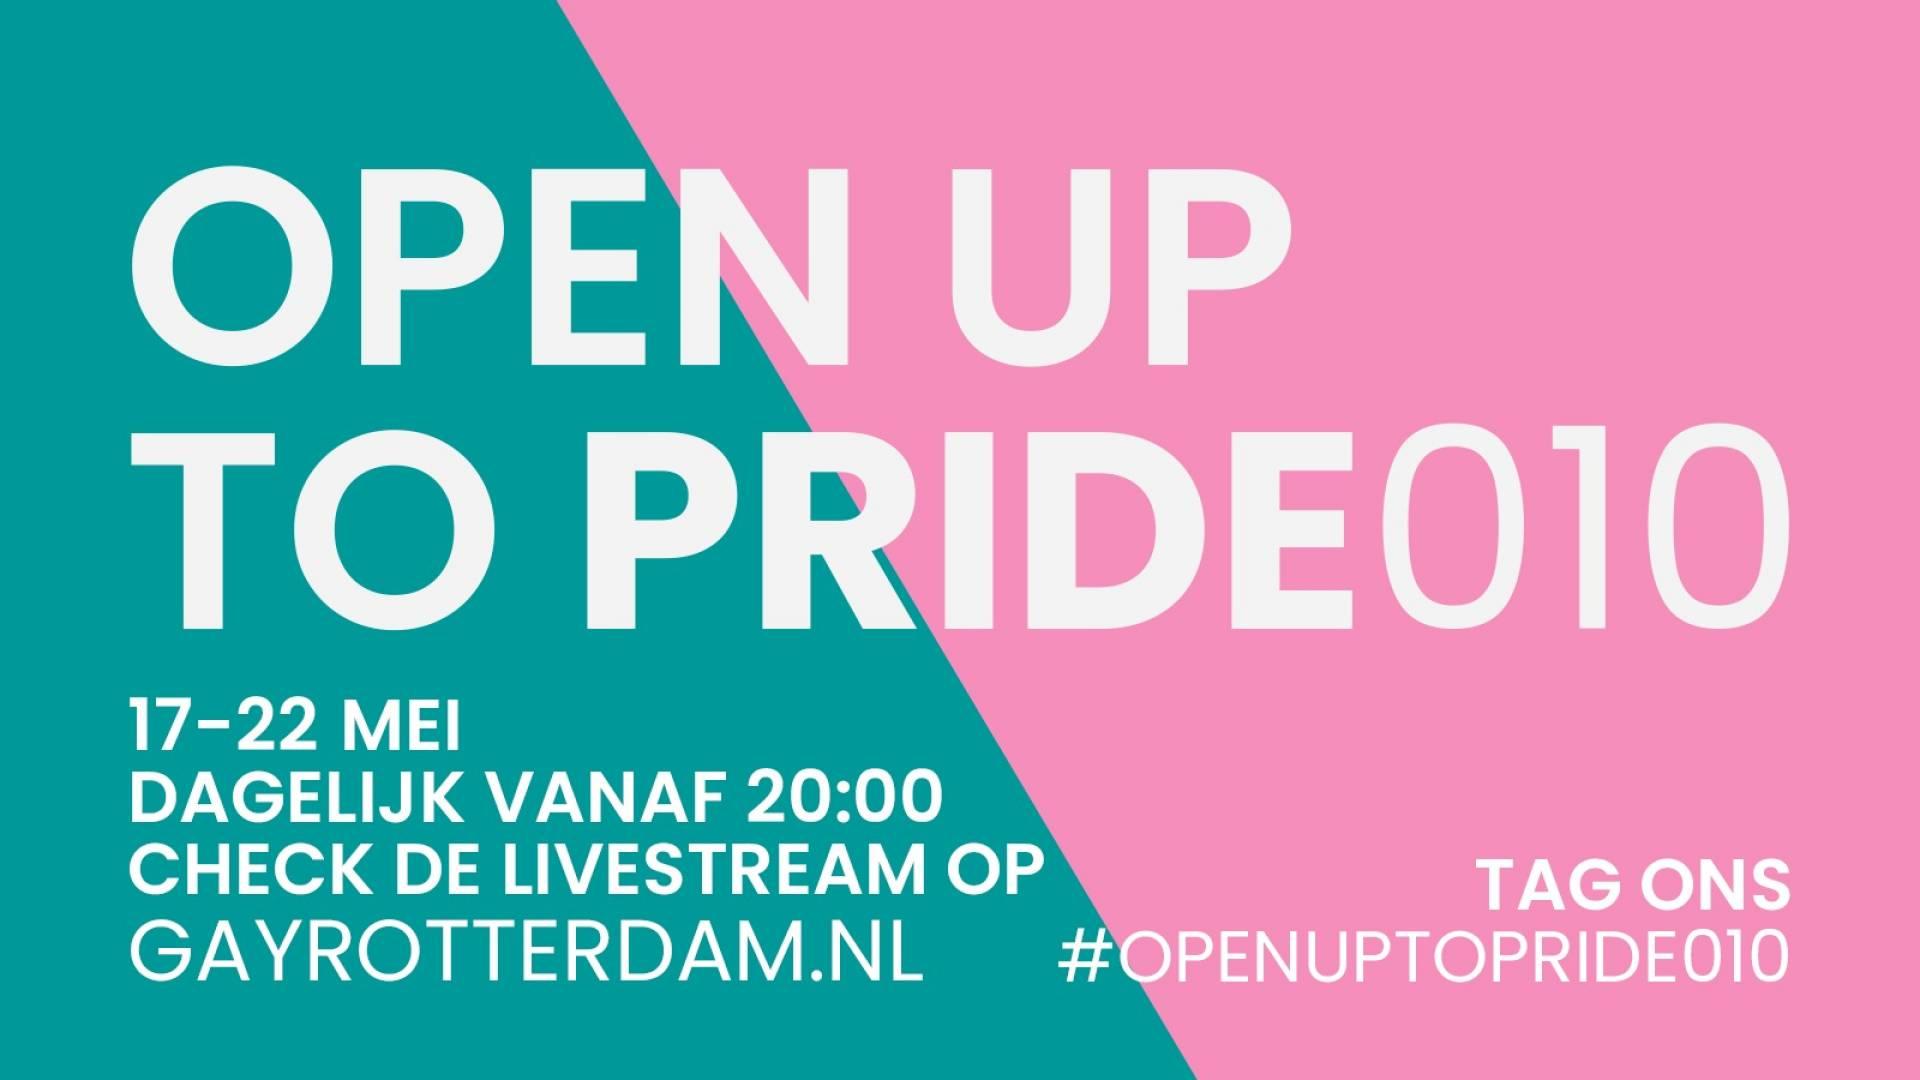 Open Up to Pride010